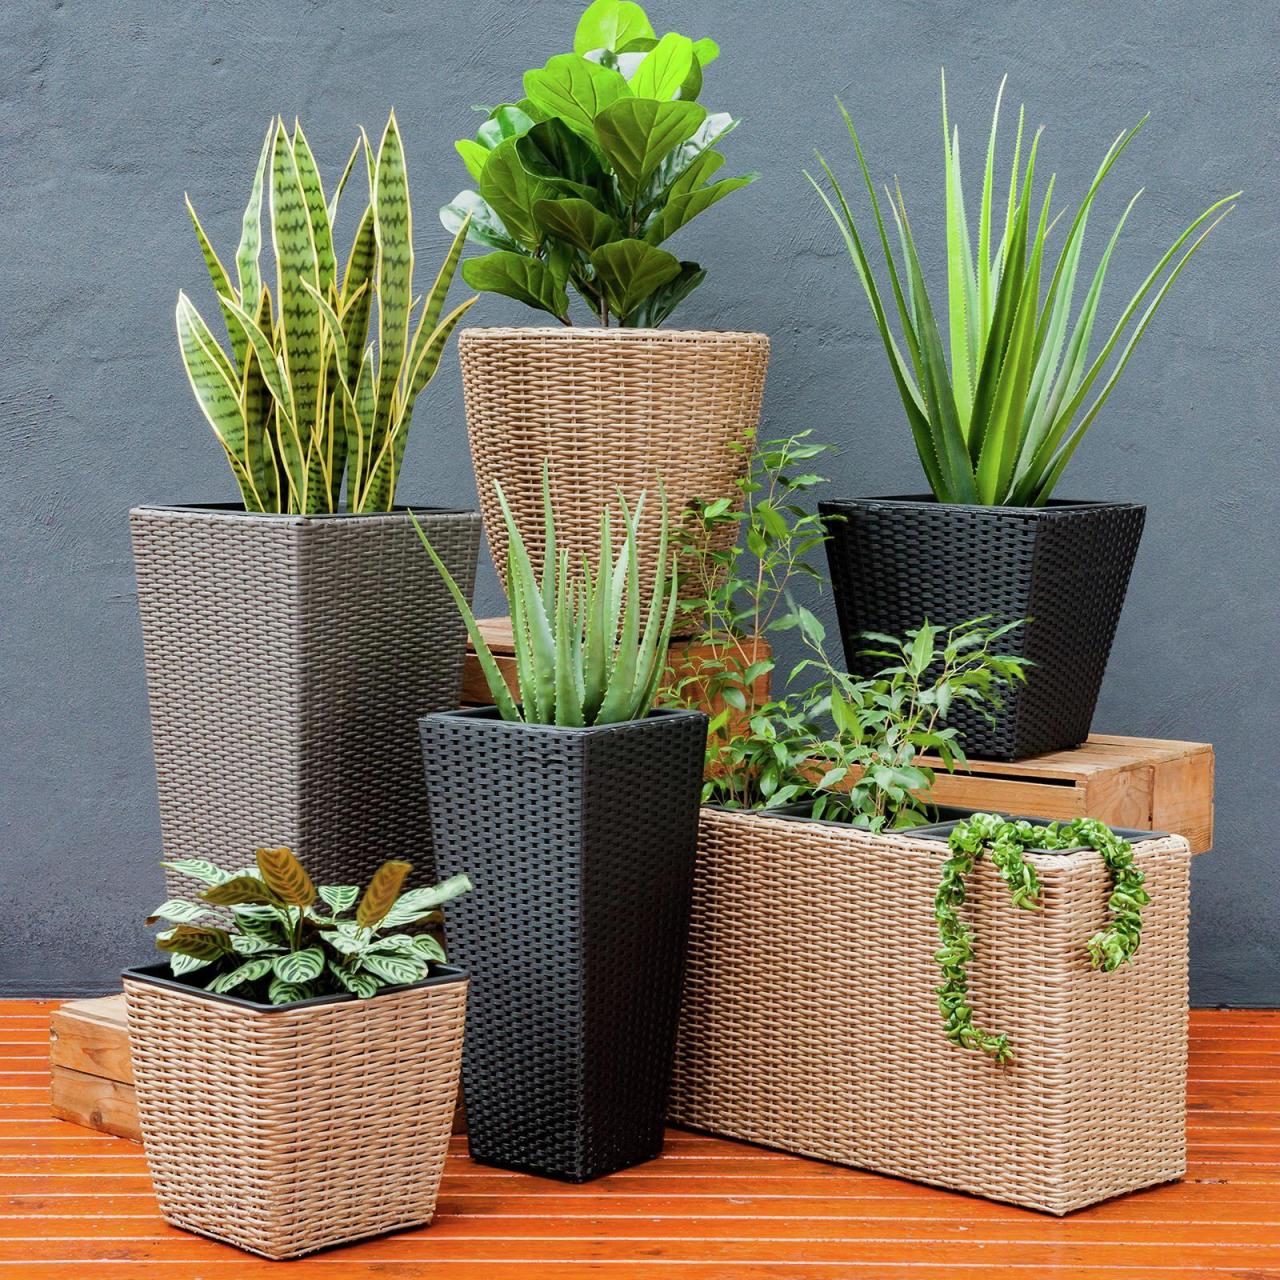 Hanging Plants Indoor | Bunnings Large Round Pots: A Versatile Solution for Gardening and Decor